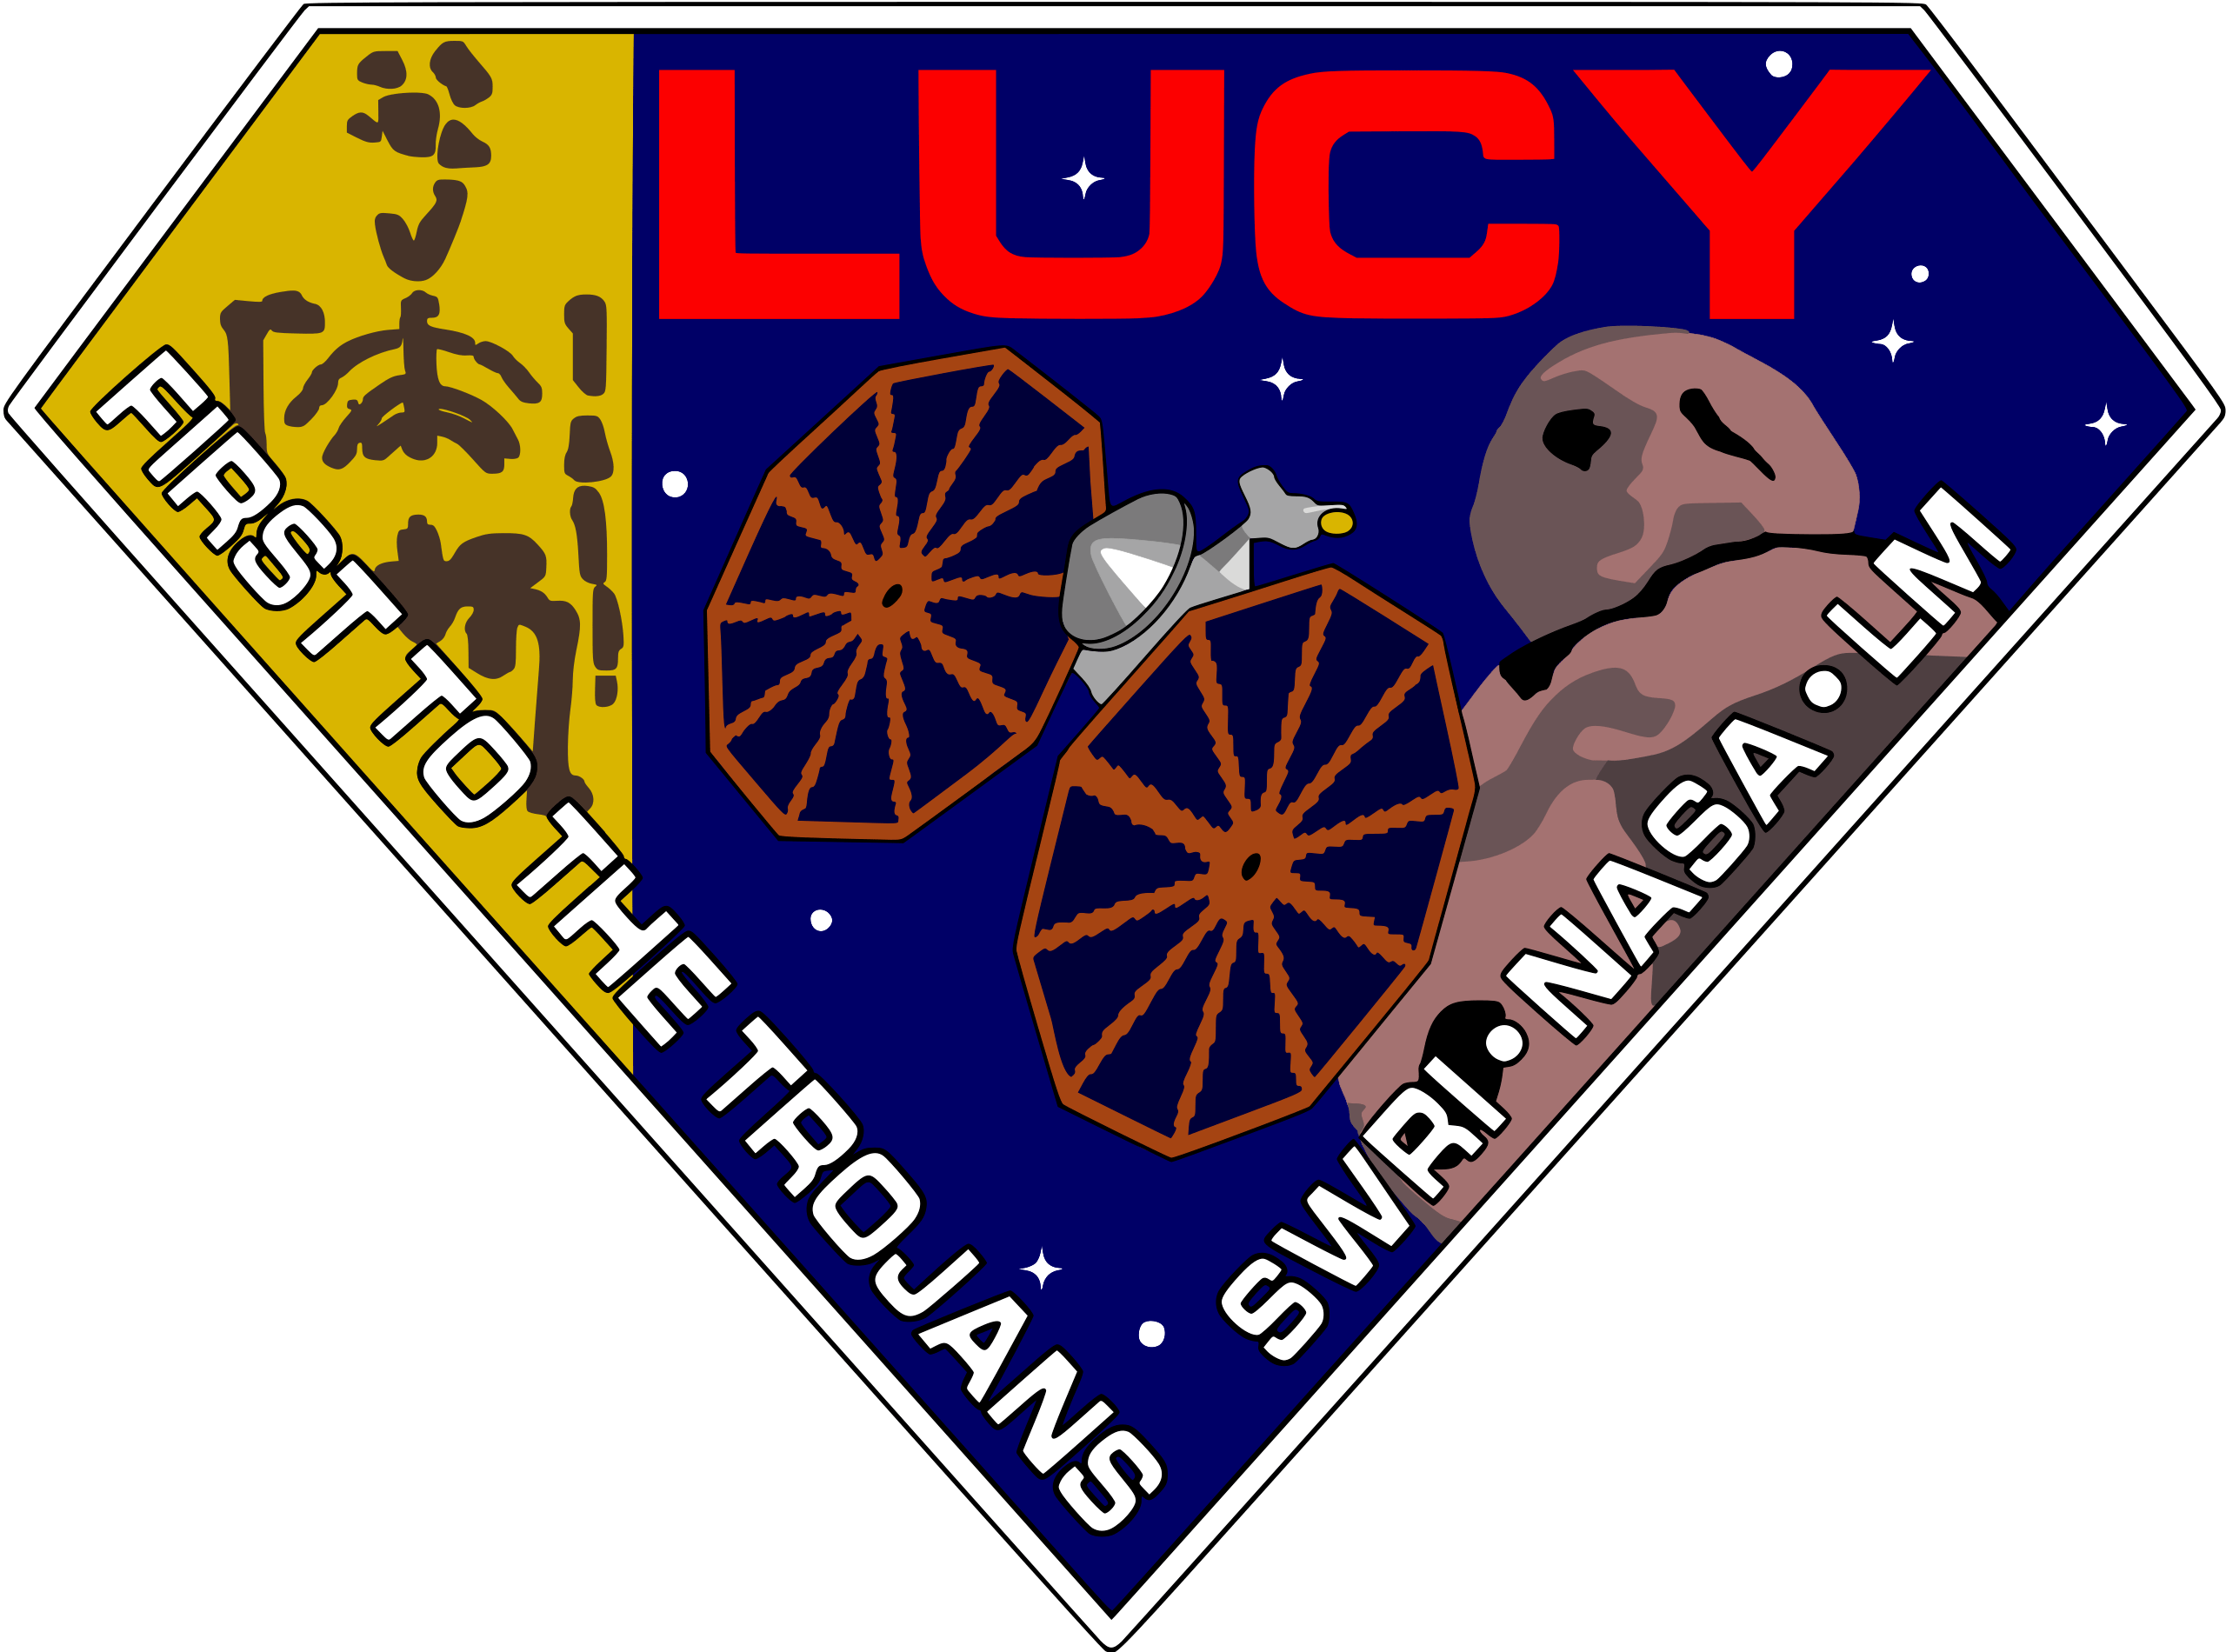 The Lucy logo says "first to the Trojan asteroids. It features an outline of the Lucy skeleton, the spacecraft and Trojan asteroids in the backgorund.